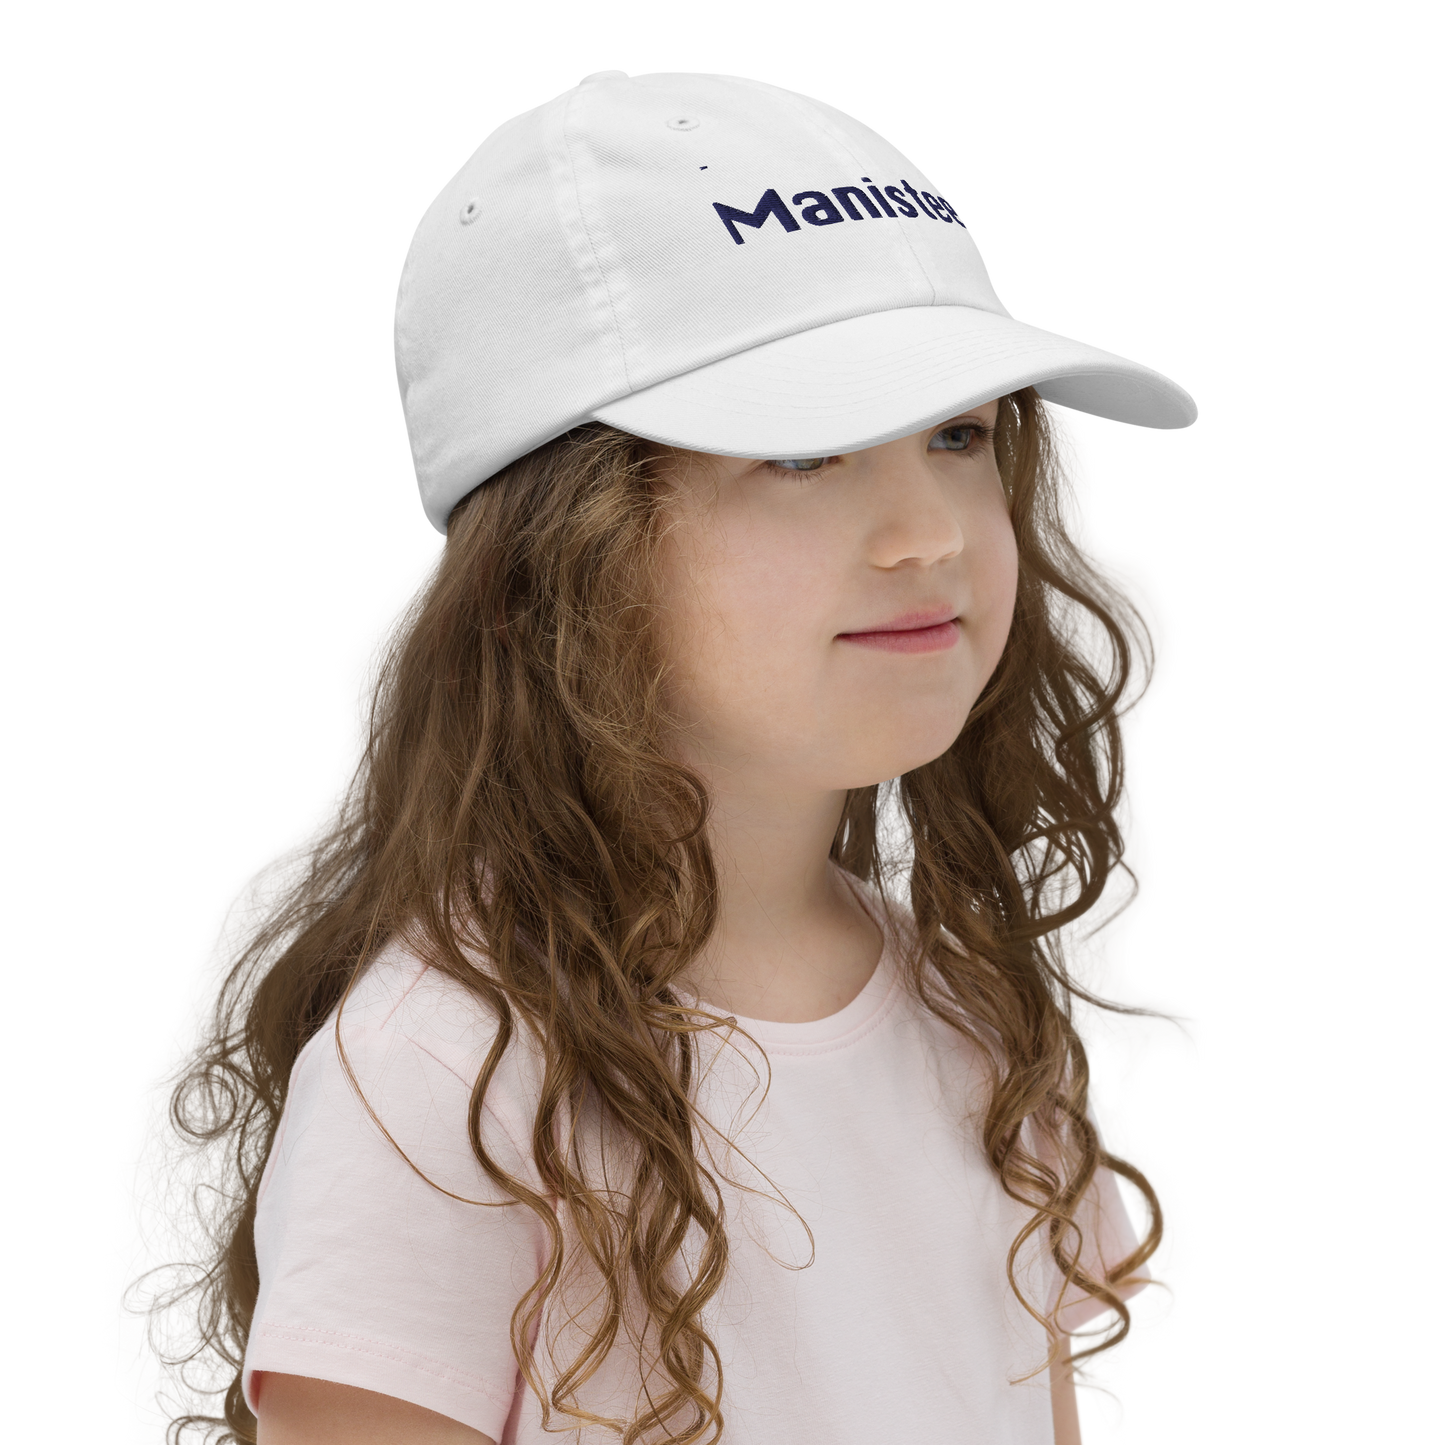 'Manistee' Youth Baseball Cap | White/Navy Embroidery